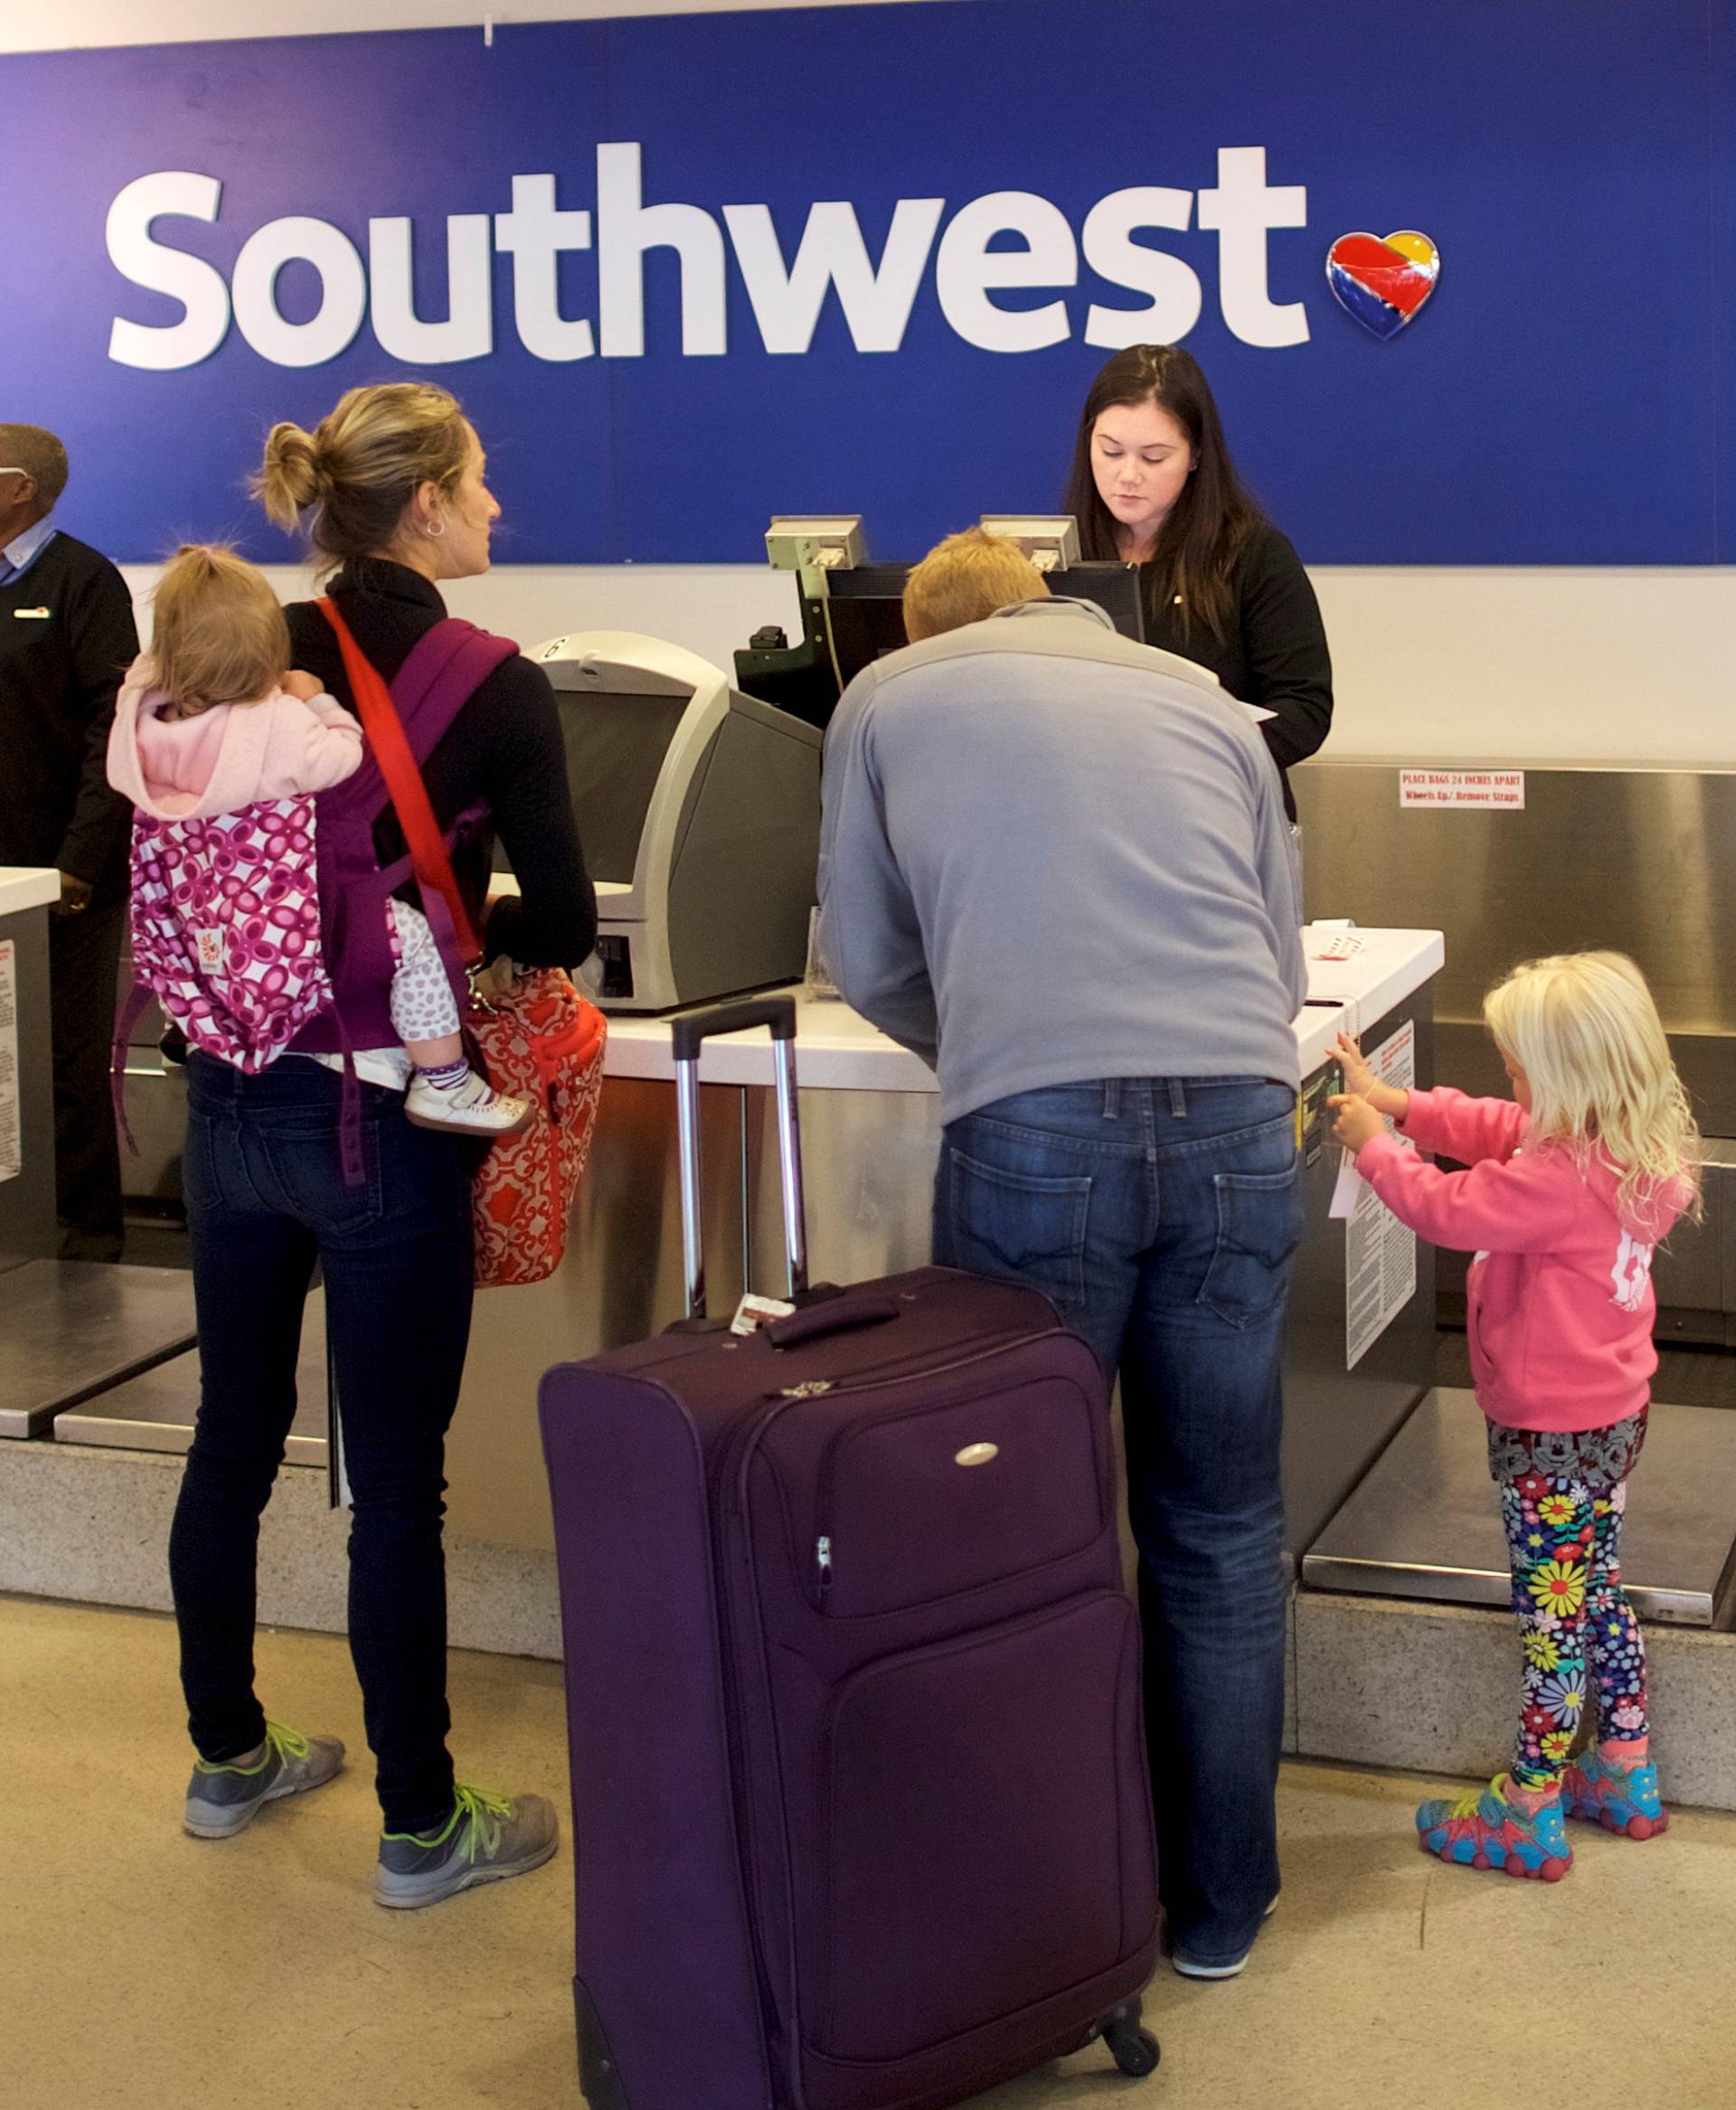 A family check in for their Southwest flight in Philadelphia International Airport